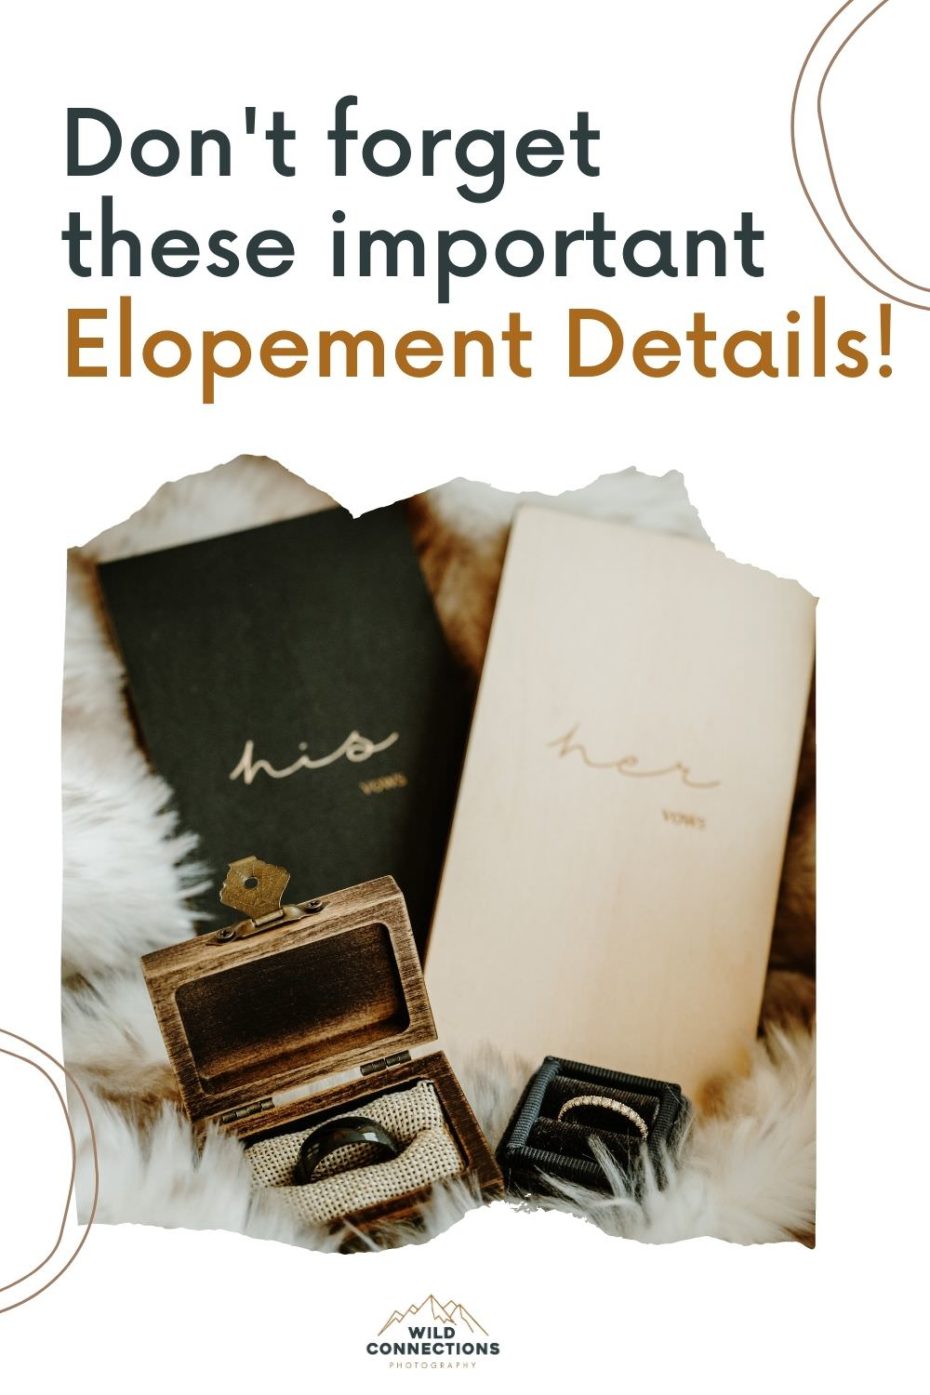 Don't forget these small details to personalise your elopement day